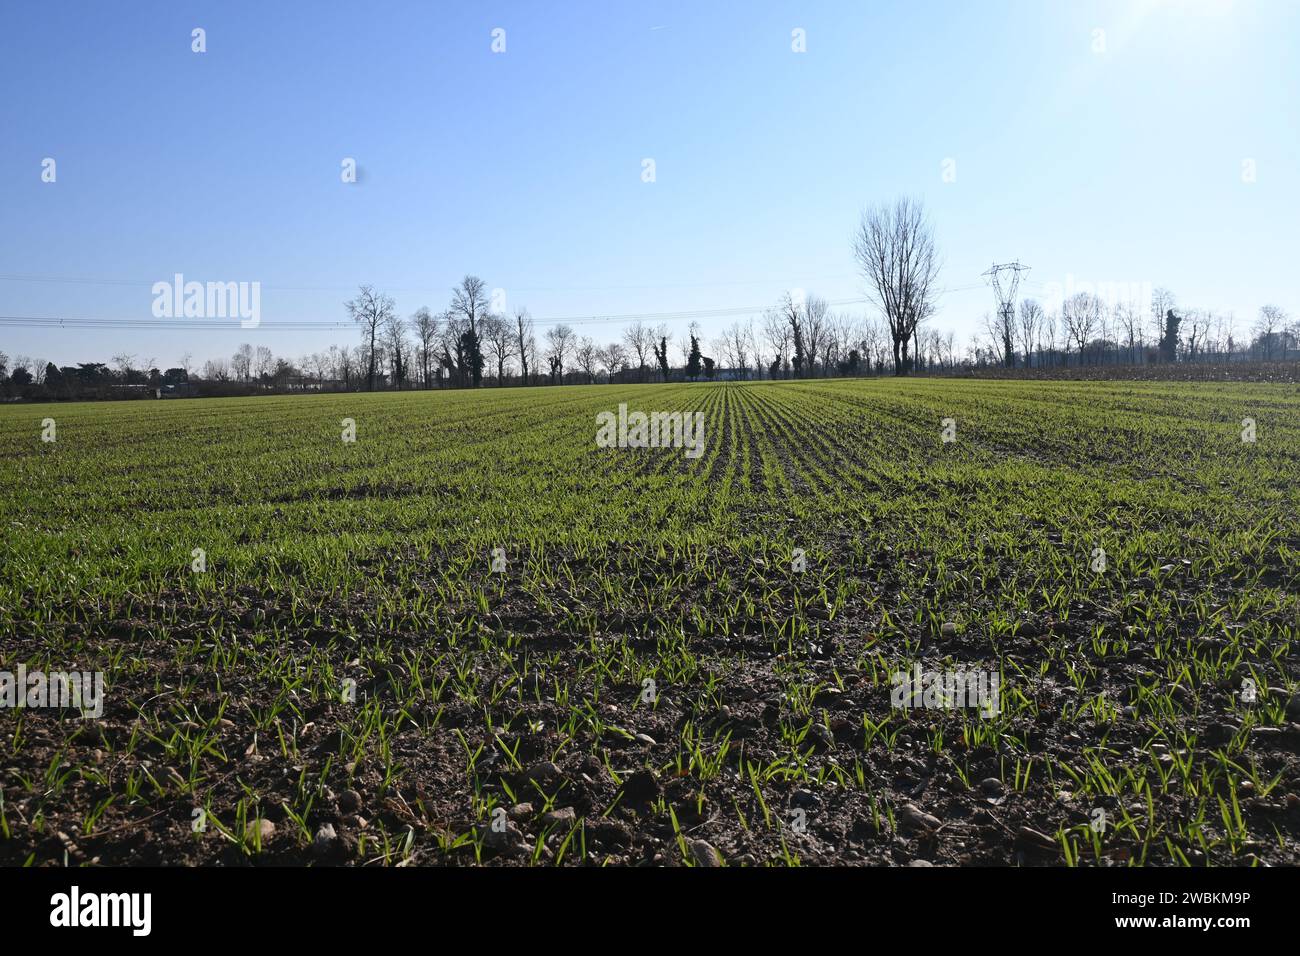 Cultivation field Stock Photo